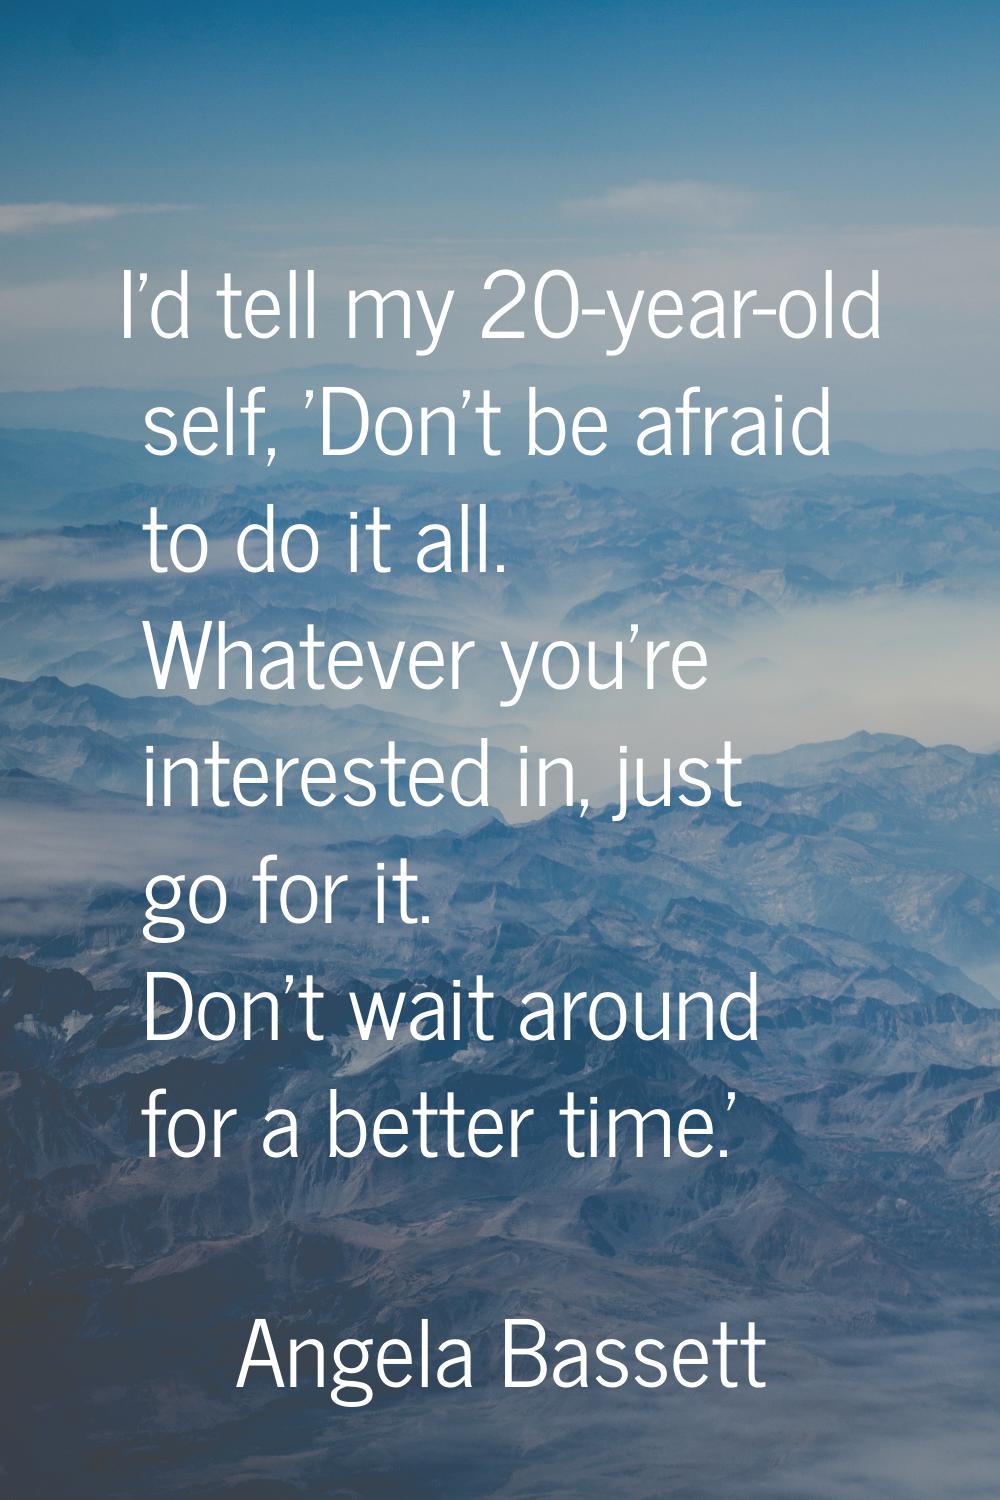 I'd tell my 20-year-old self, 'Don't be afraid to do it all. Whatever you're interested in, just go